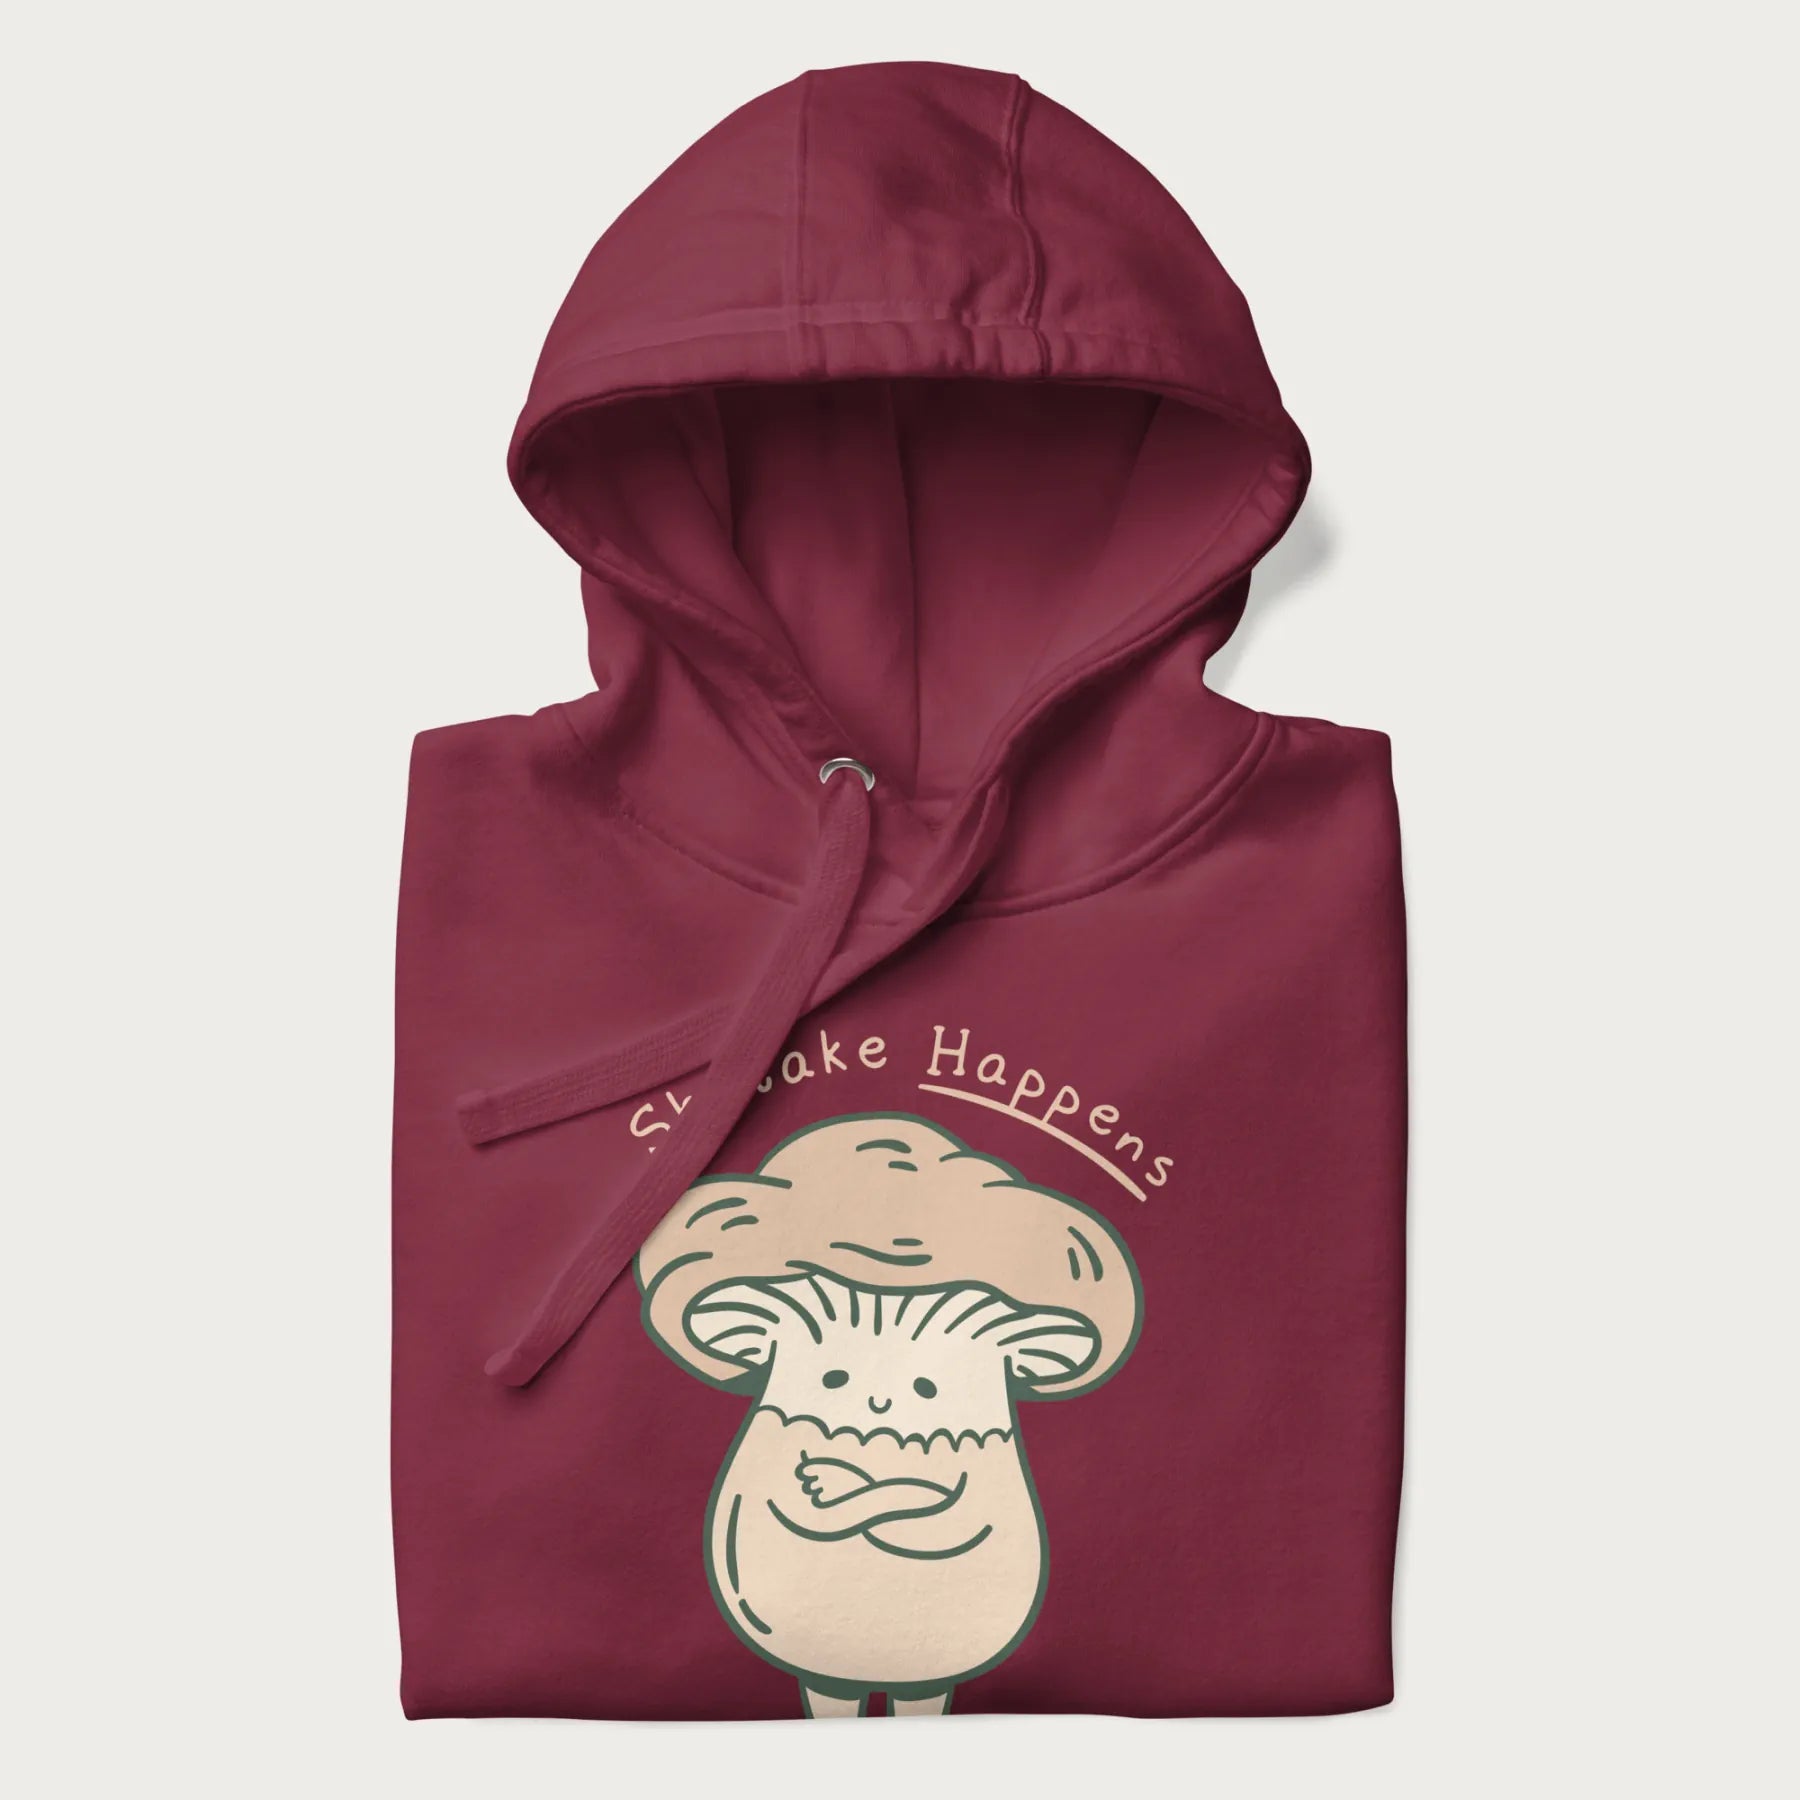 Folded maroon hoodie with a graphic of an adorable mushroom character and the text 'Shiitake Happens'.